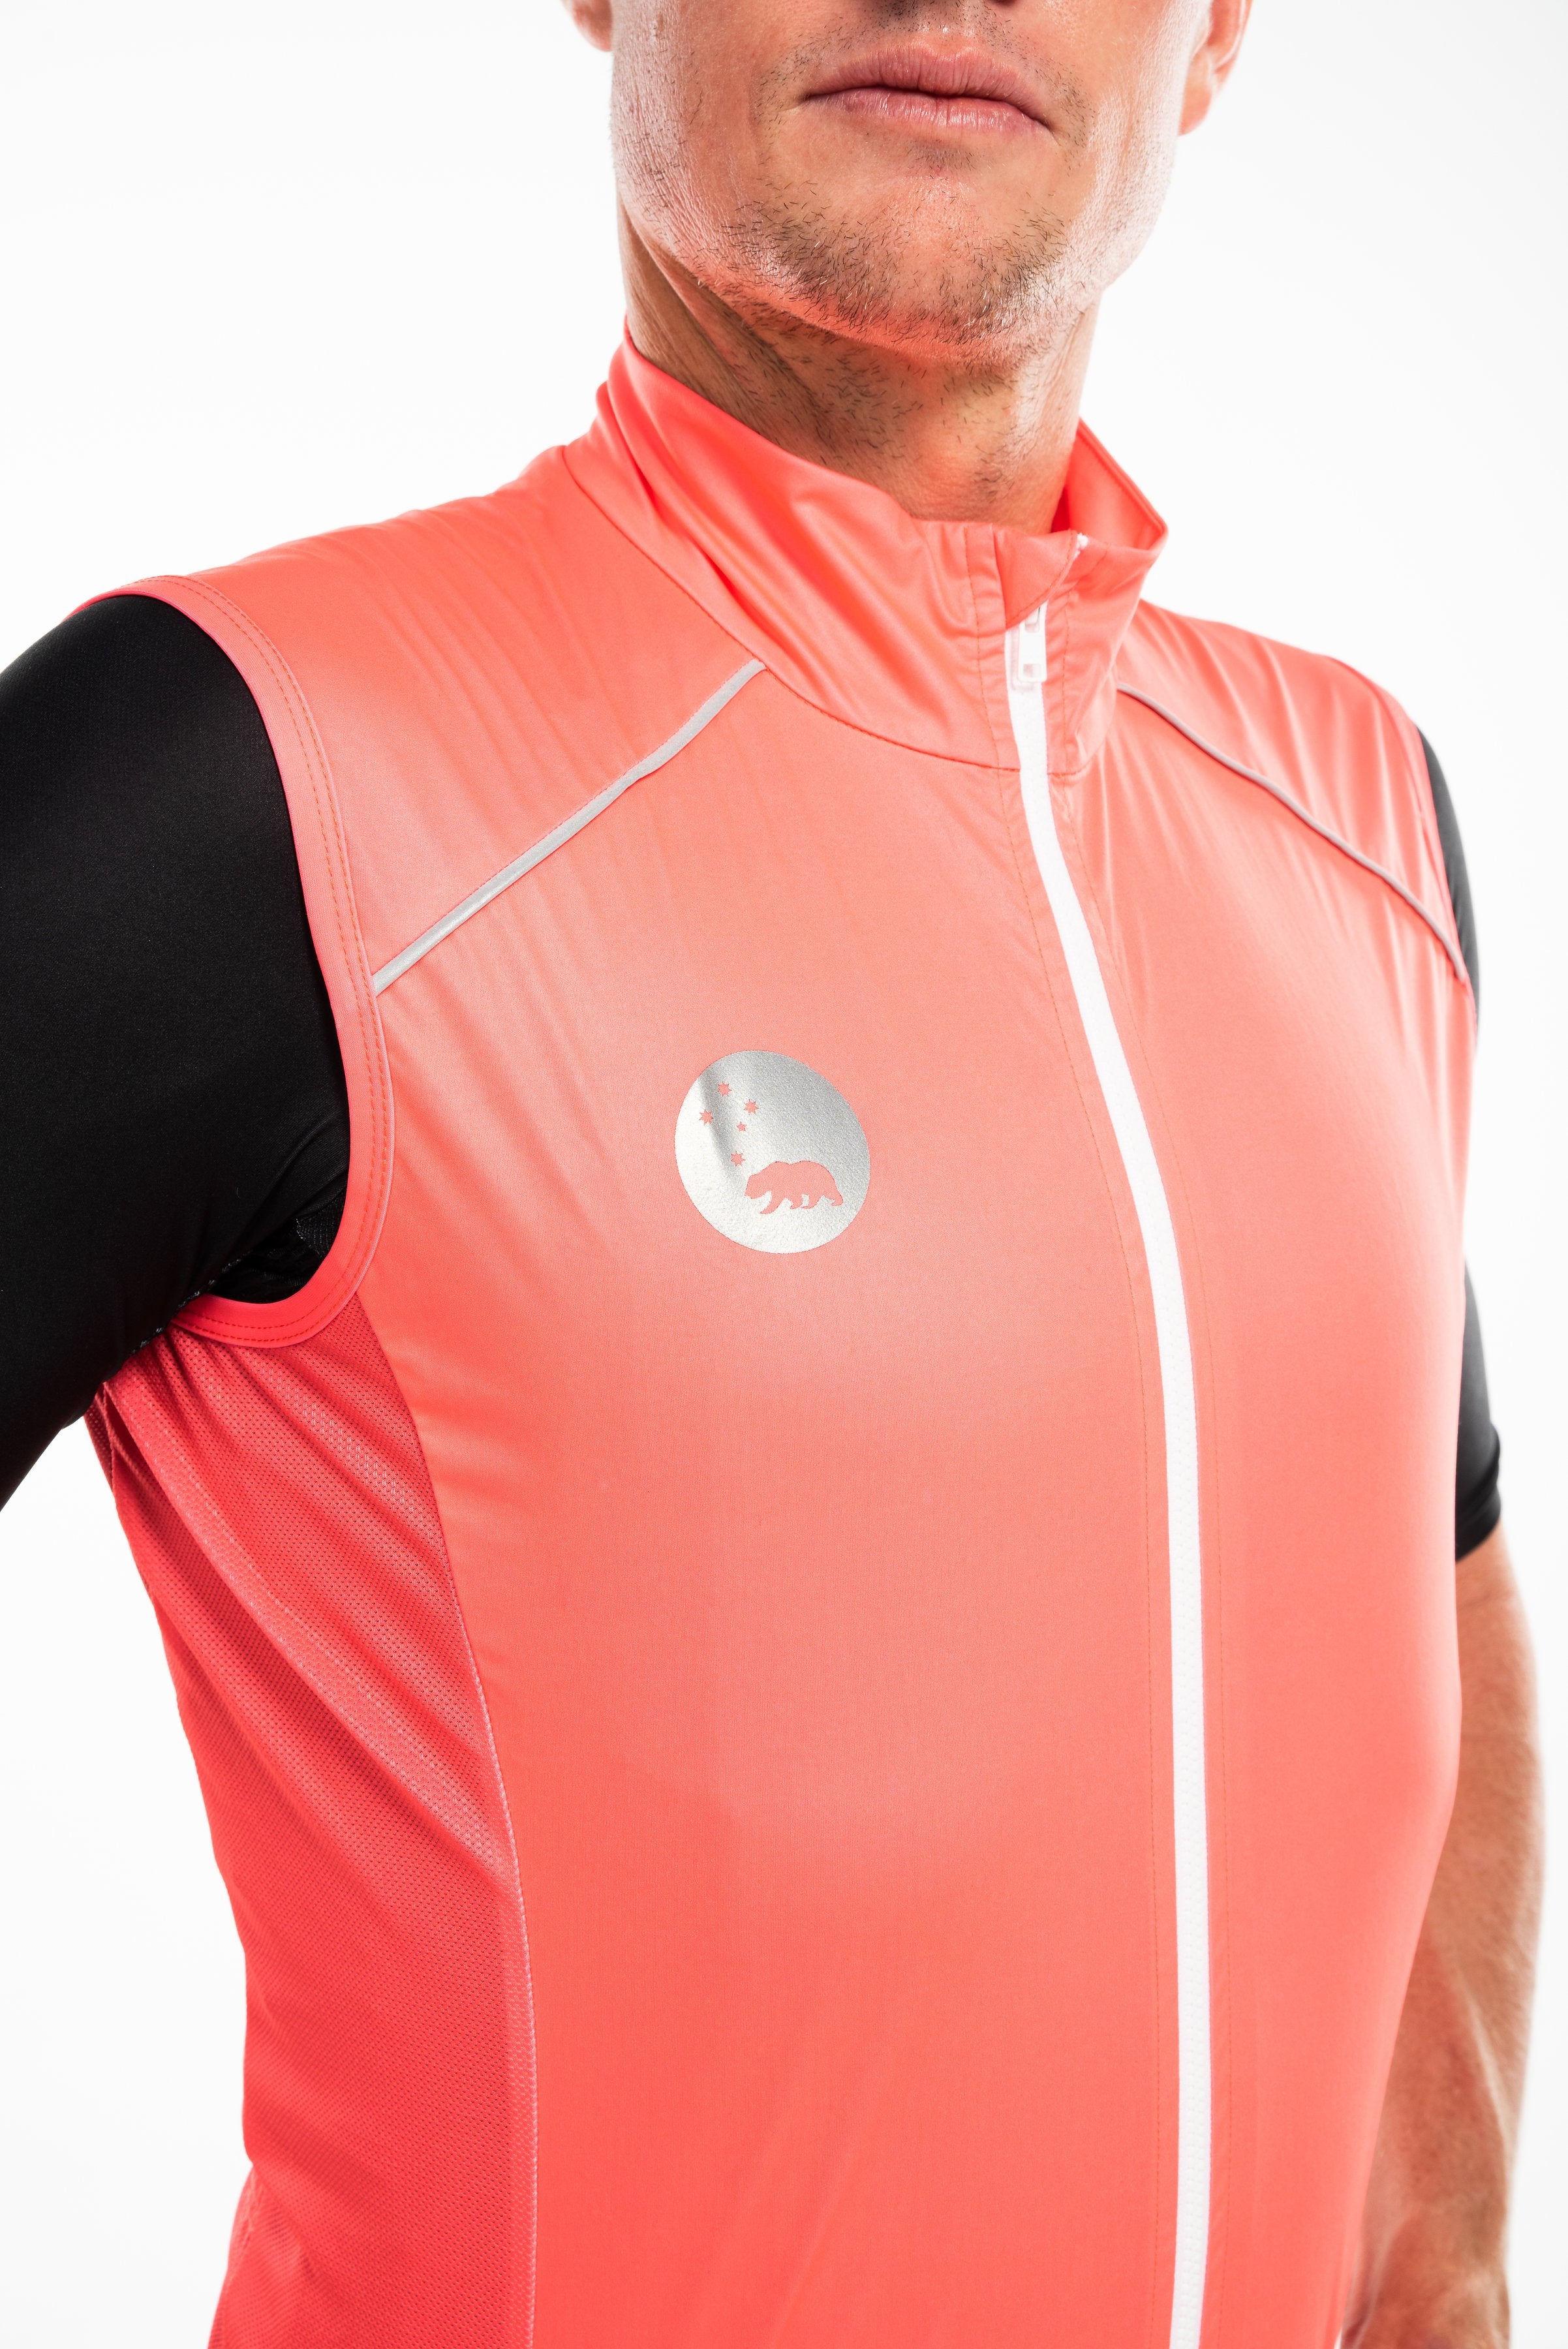 Close view men's neon gilet. Wind-stop fabric for warmth. Reflective bear logo for safety.